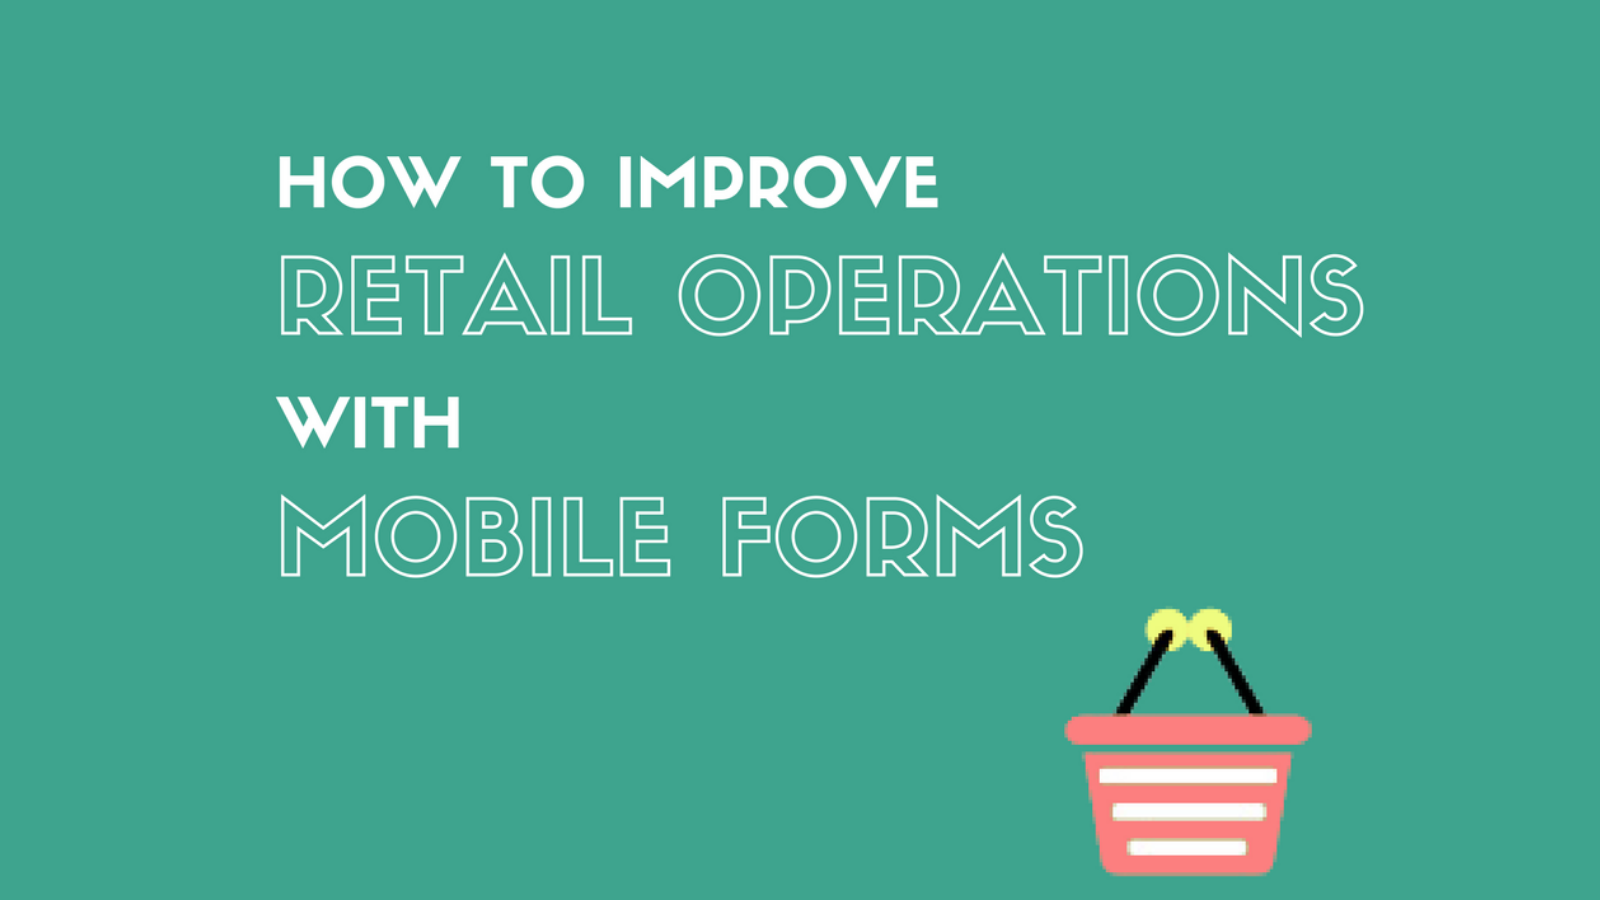 How to Improve Retail Operations with Mobile Forms